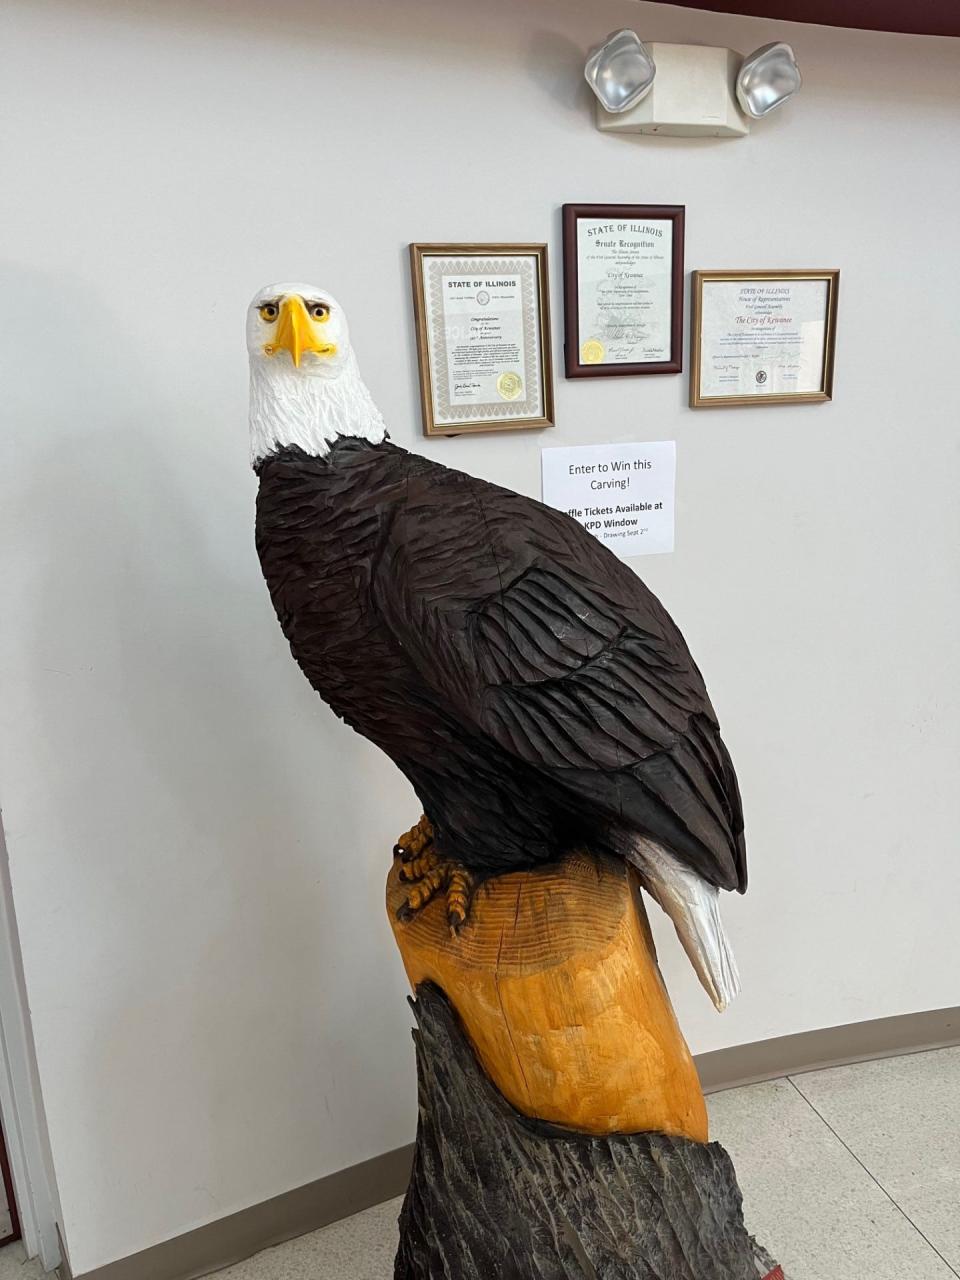 A chainsaw carving by Timothy Bryner, a police officer with the Kewanee Police Department and owner of Bryner's Chainsaw Carvings, will be raffled off with proceeds donated to the Welgat family.